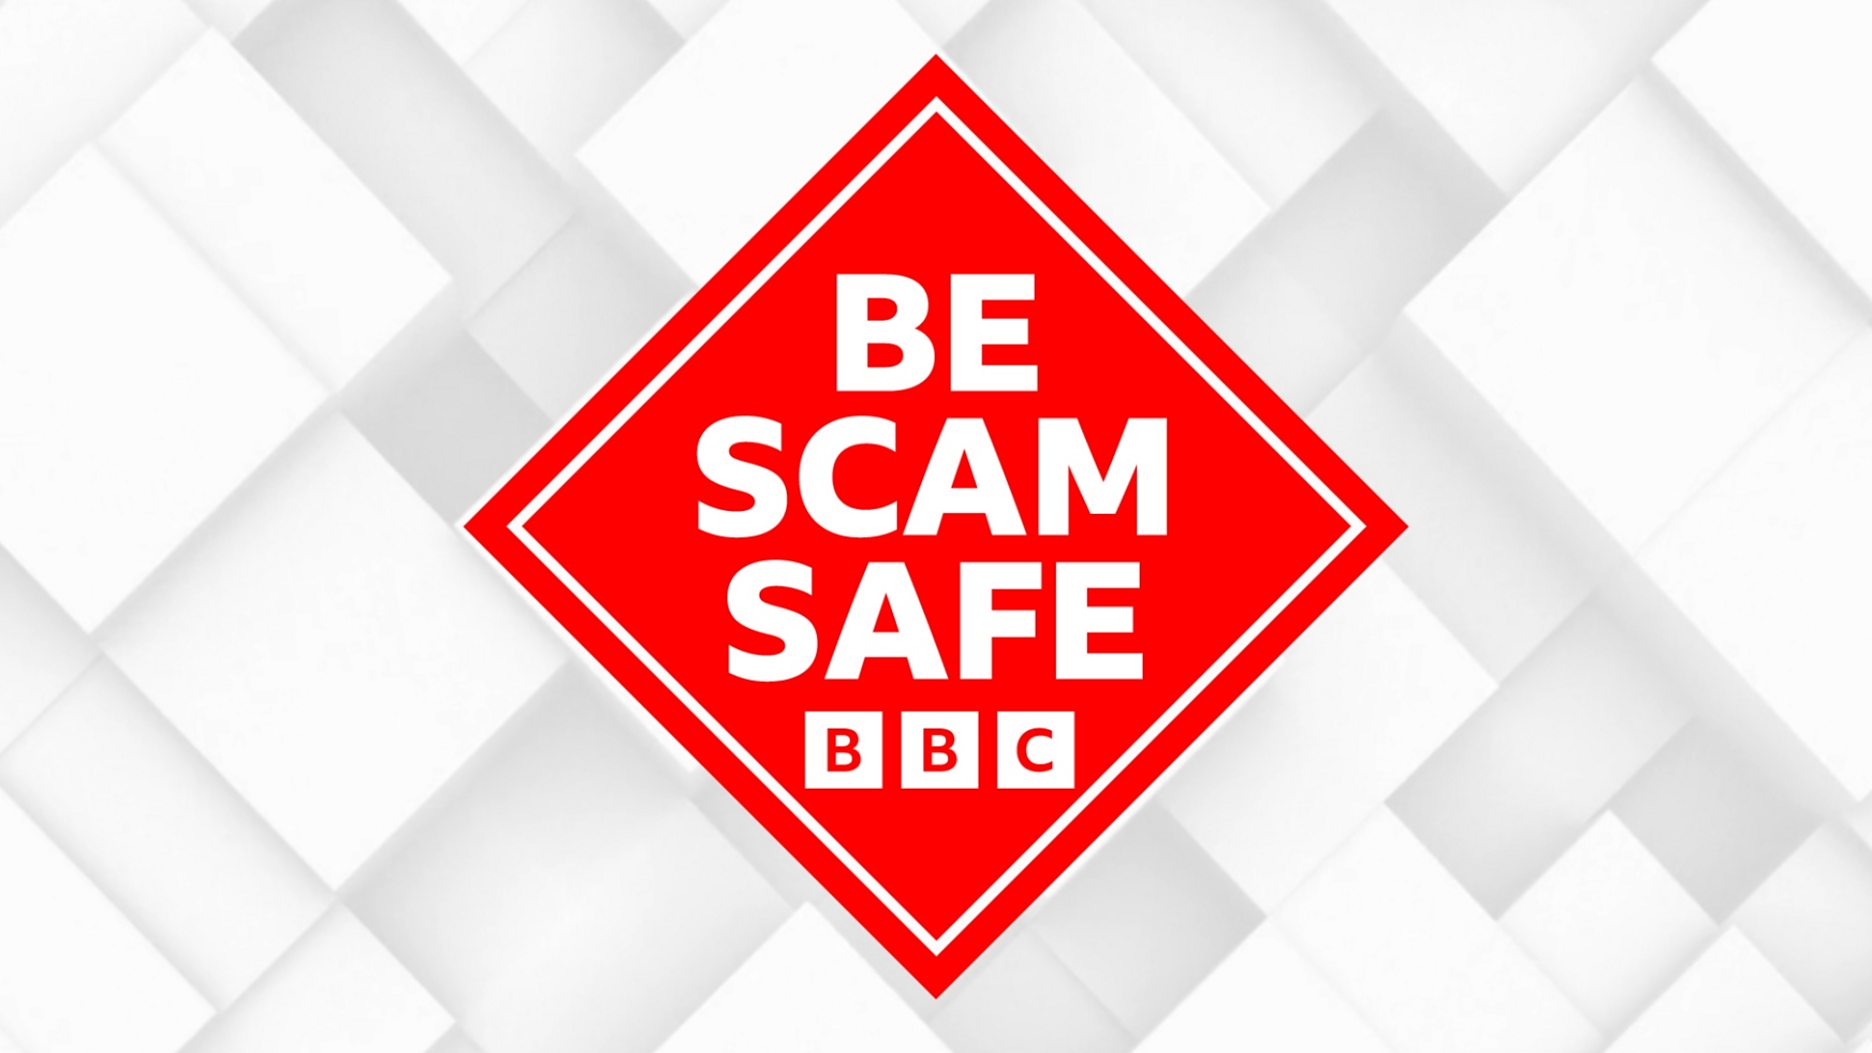 Be Scam Safe: A week of special programming across the BBC